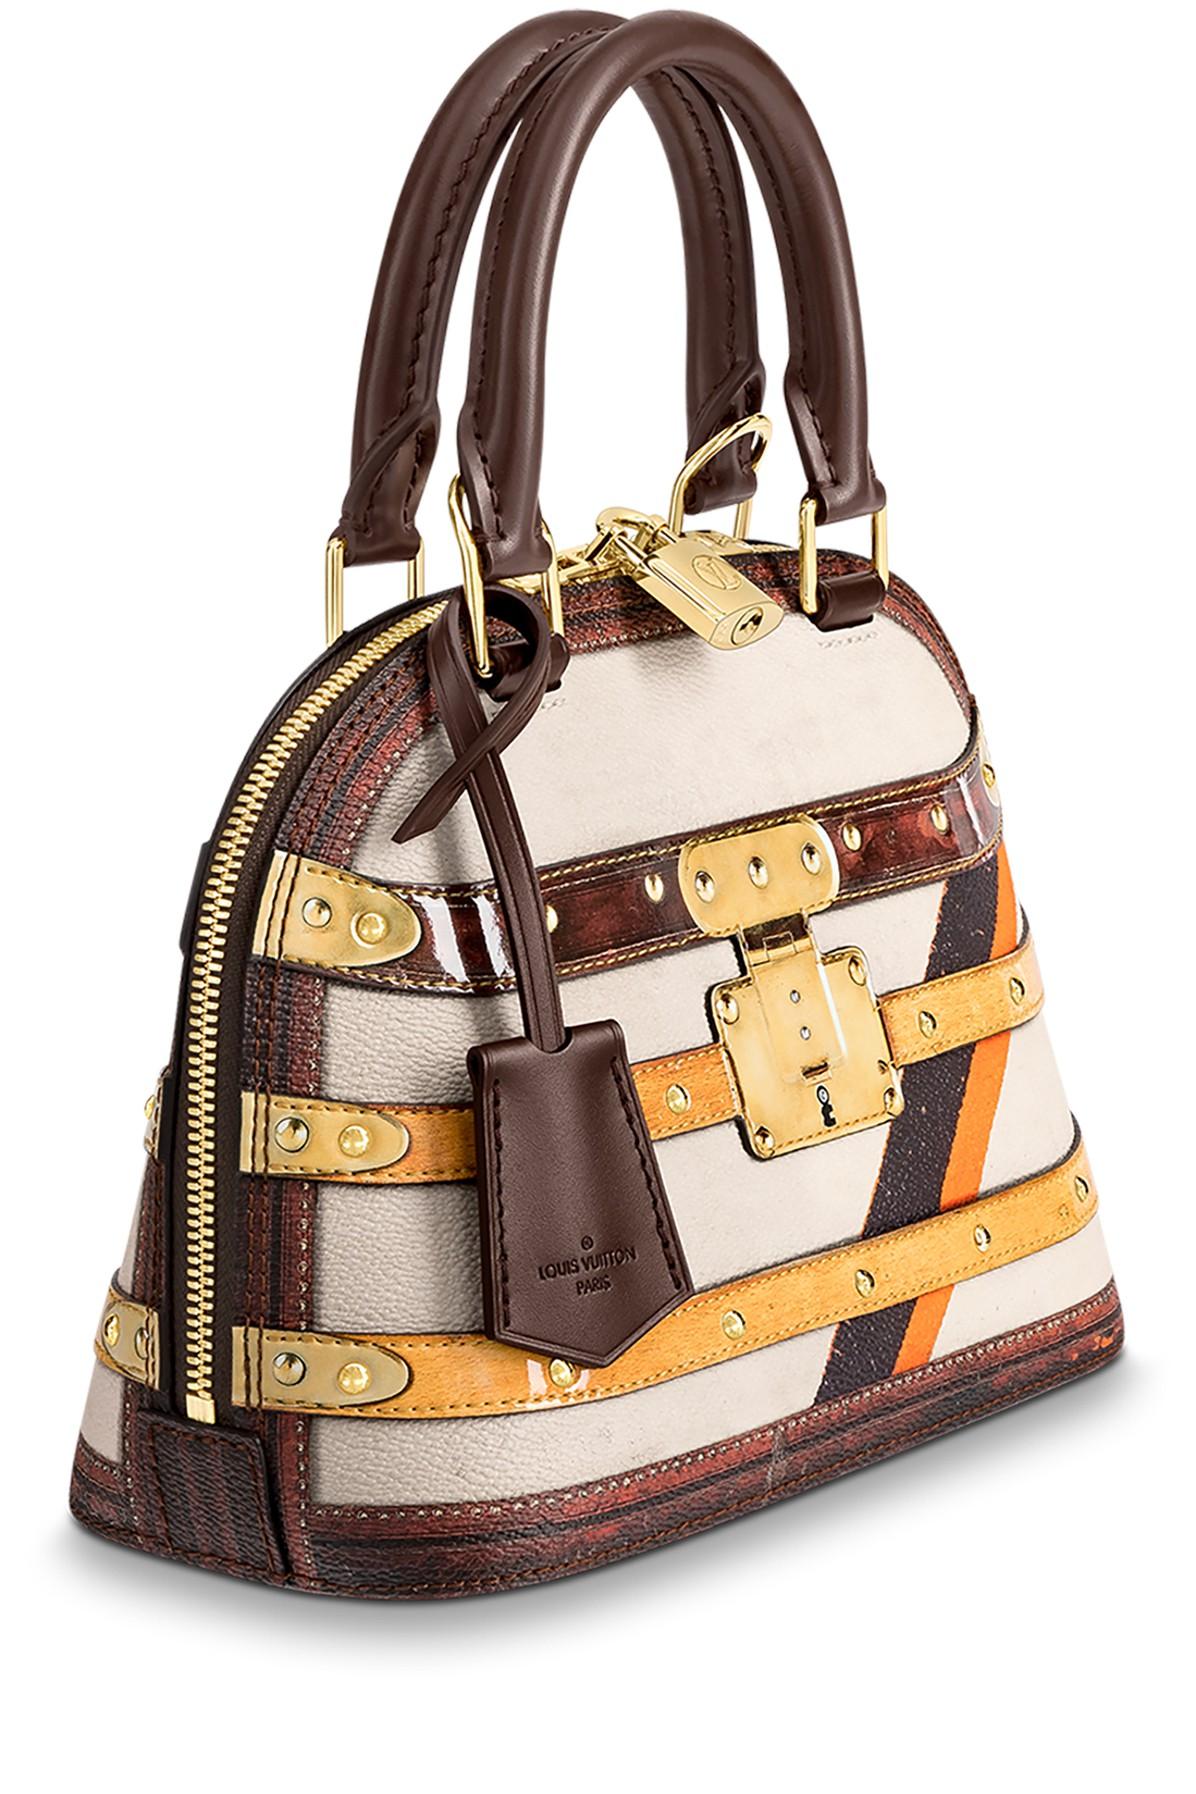 Louis Vuitton: The Alma BB Is Now Updated With A Fun Jacquard